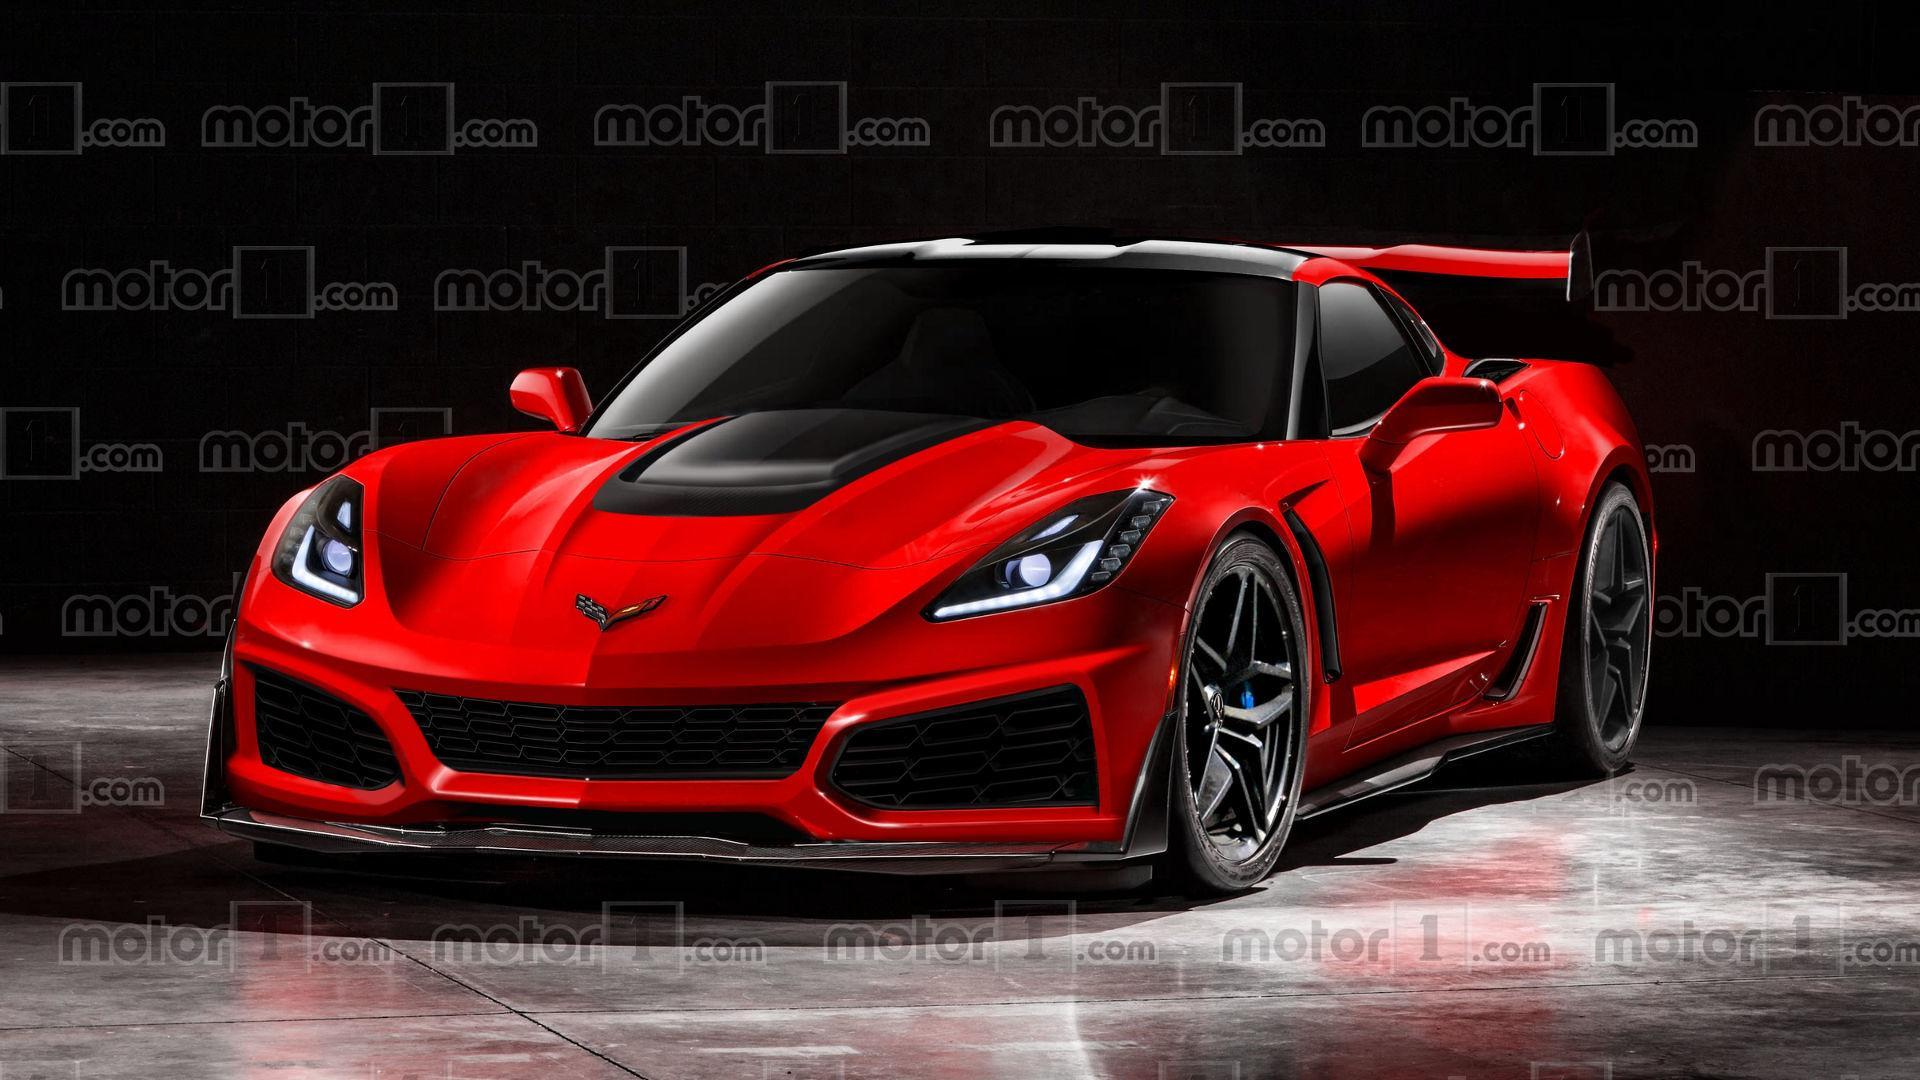 Chevy Corvette ZR1 Could And Should Look Like This